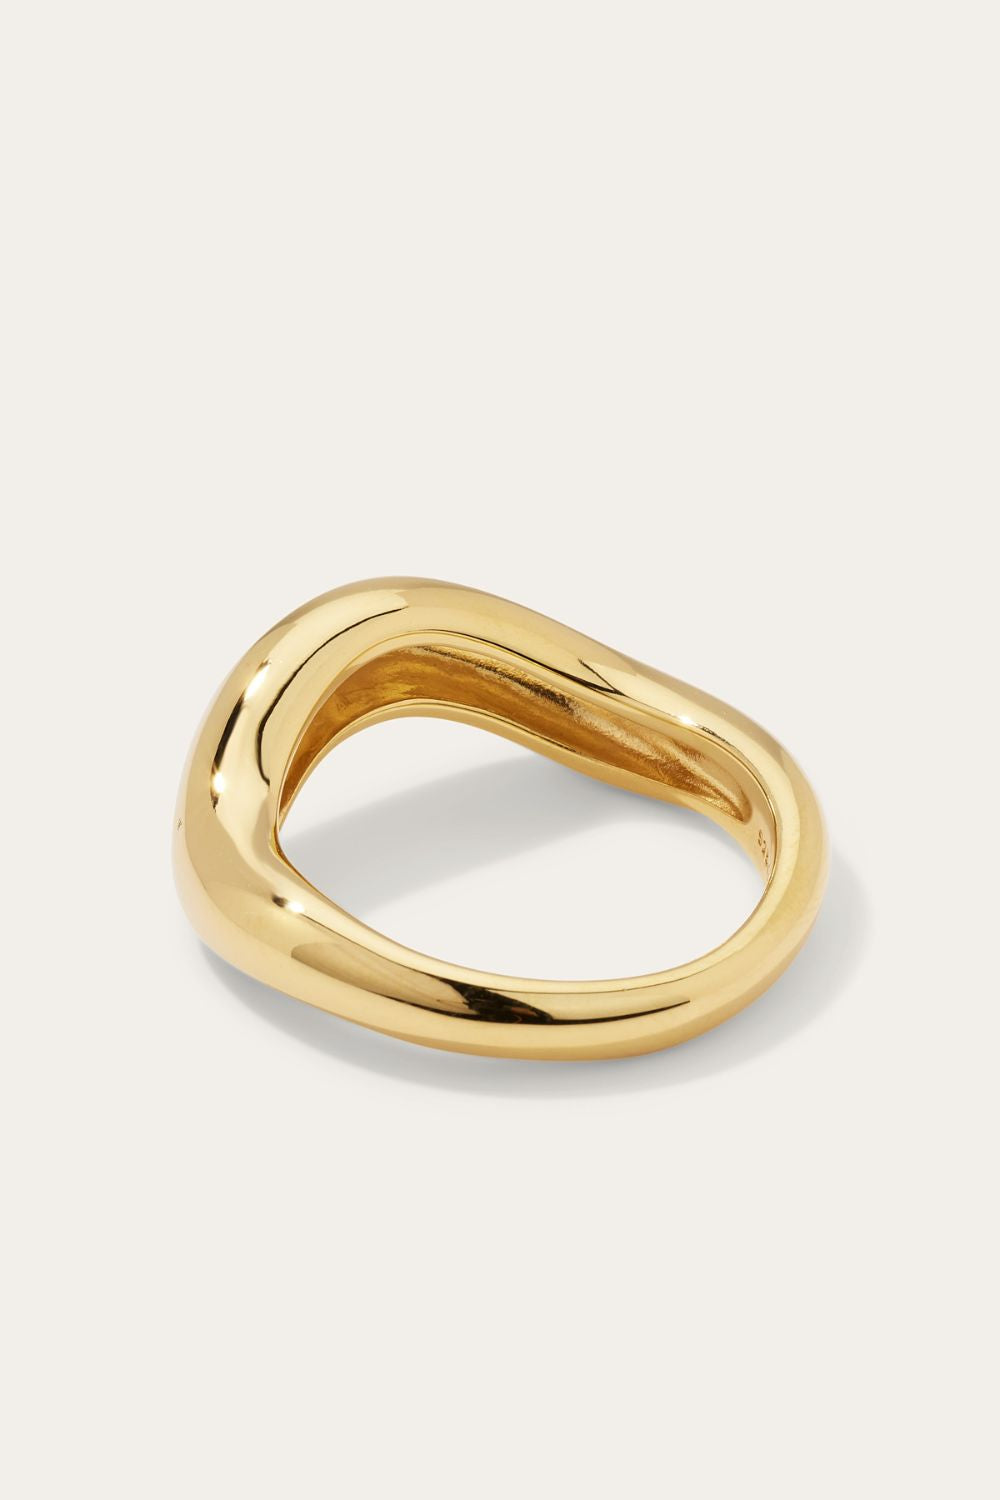 Kyma Gold Ring For Women | Kyma Jewels | Galleria Armadoro